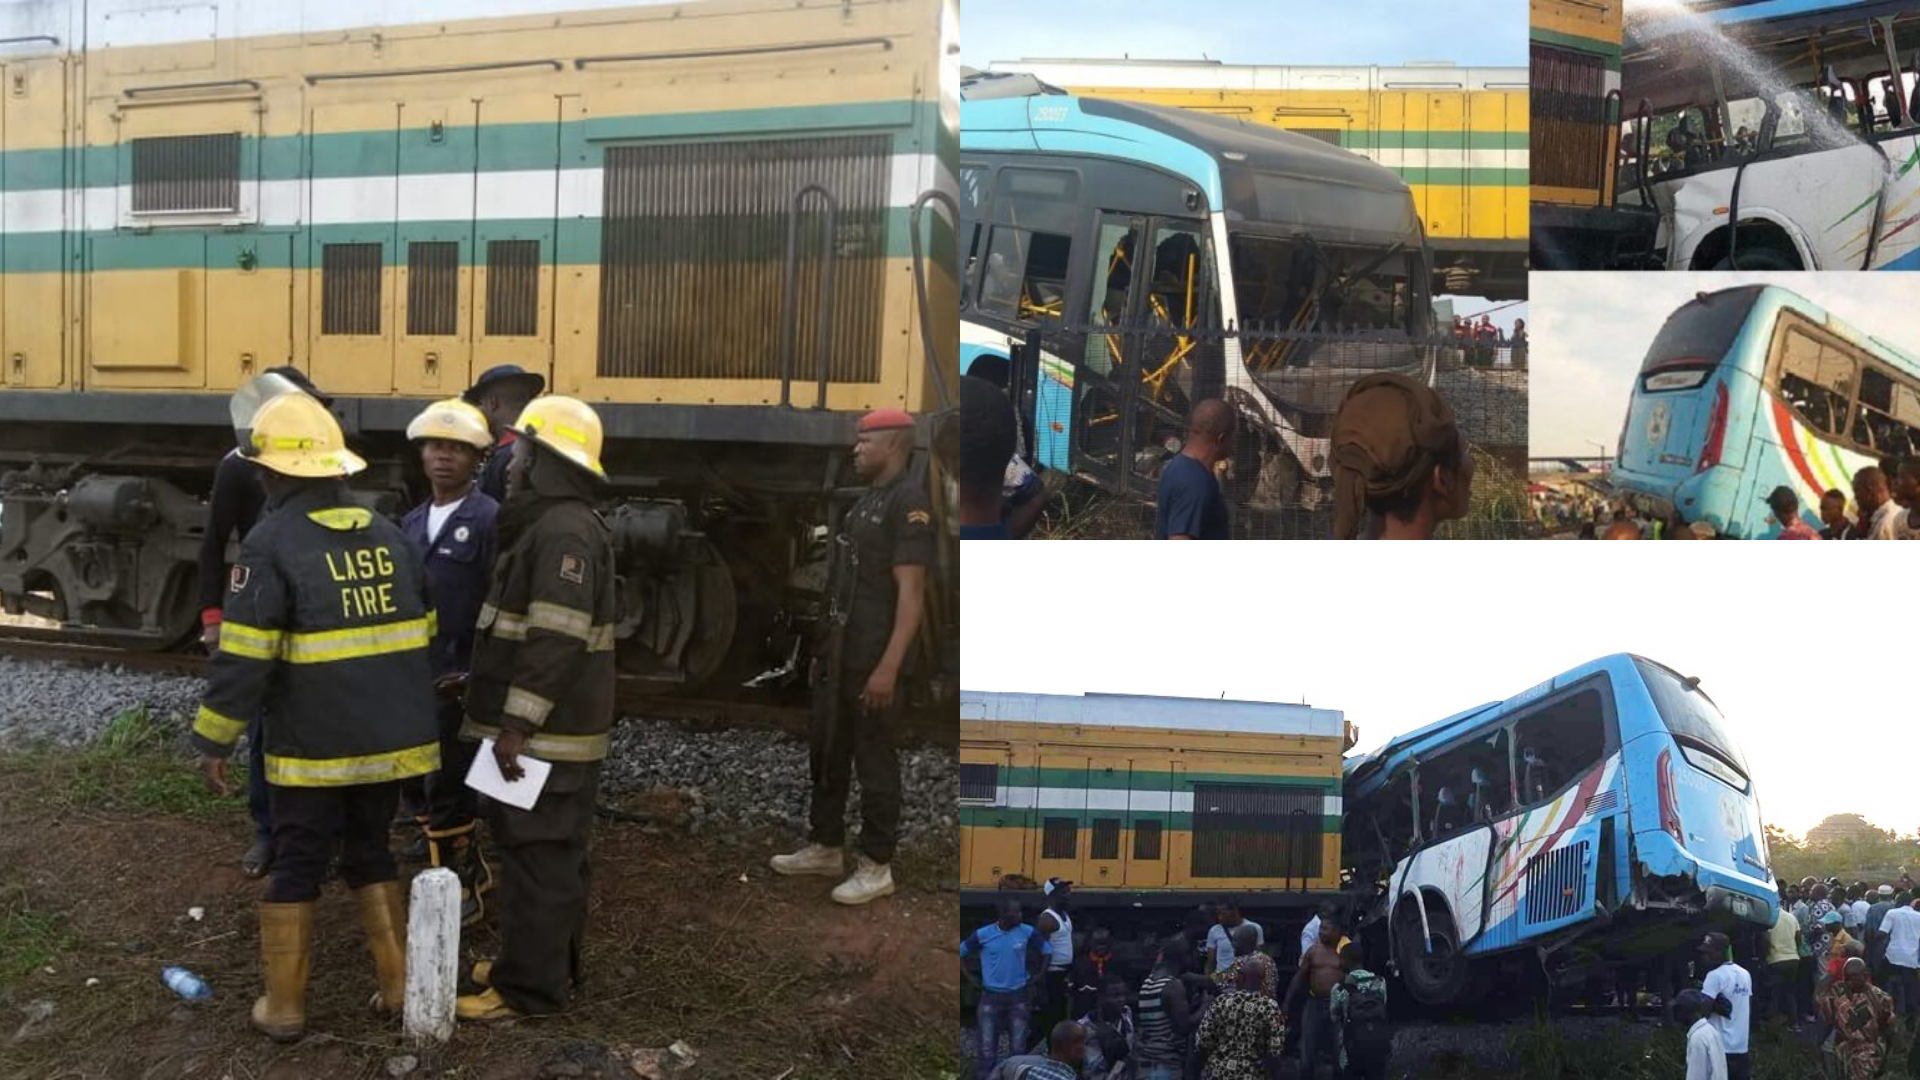 Bus Driver Apologizes and Seeks Forgiveness After Train/BRT Crash in Ikeja